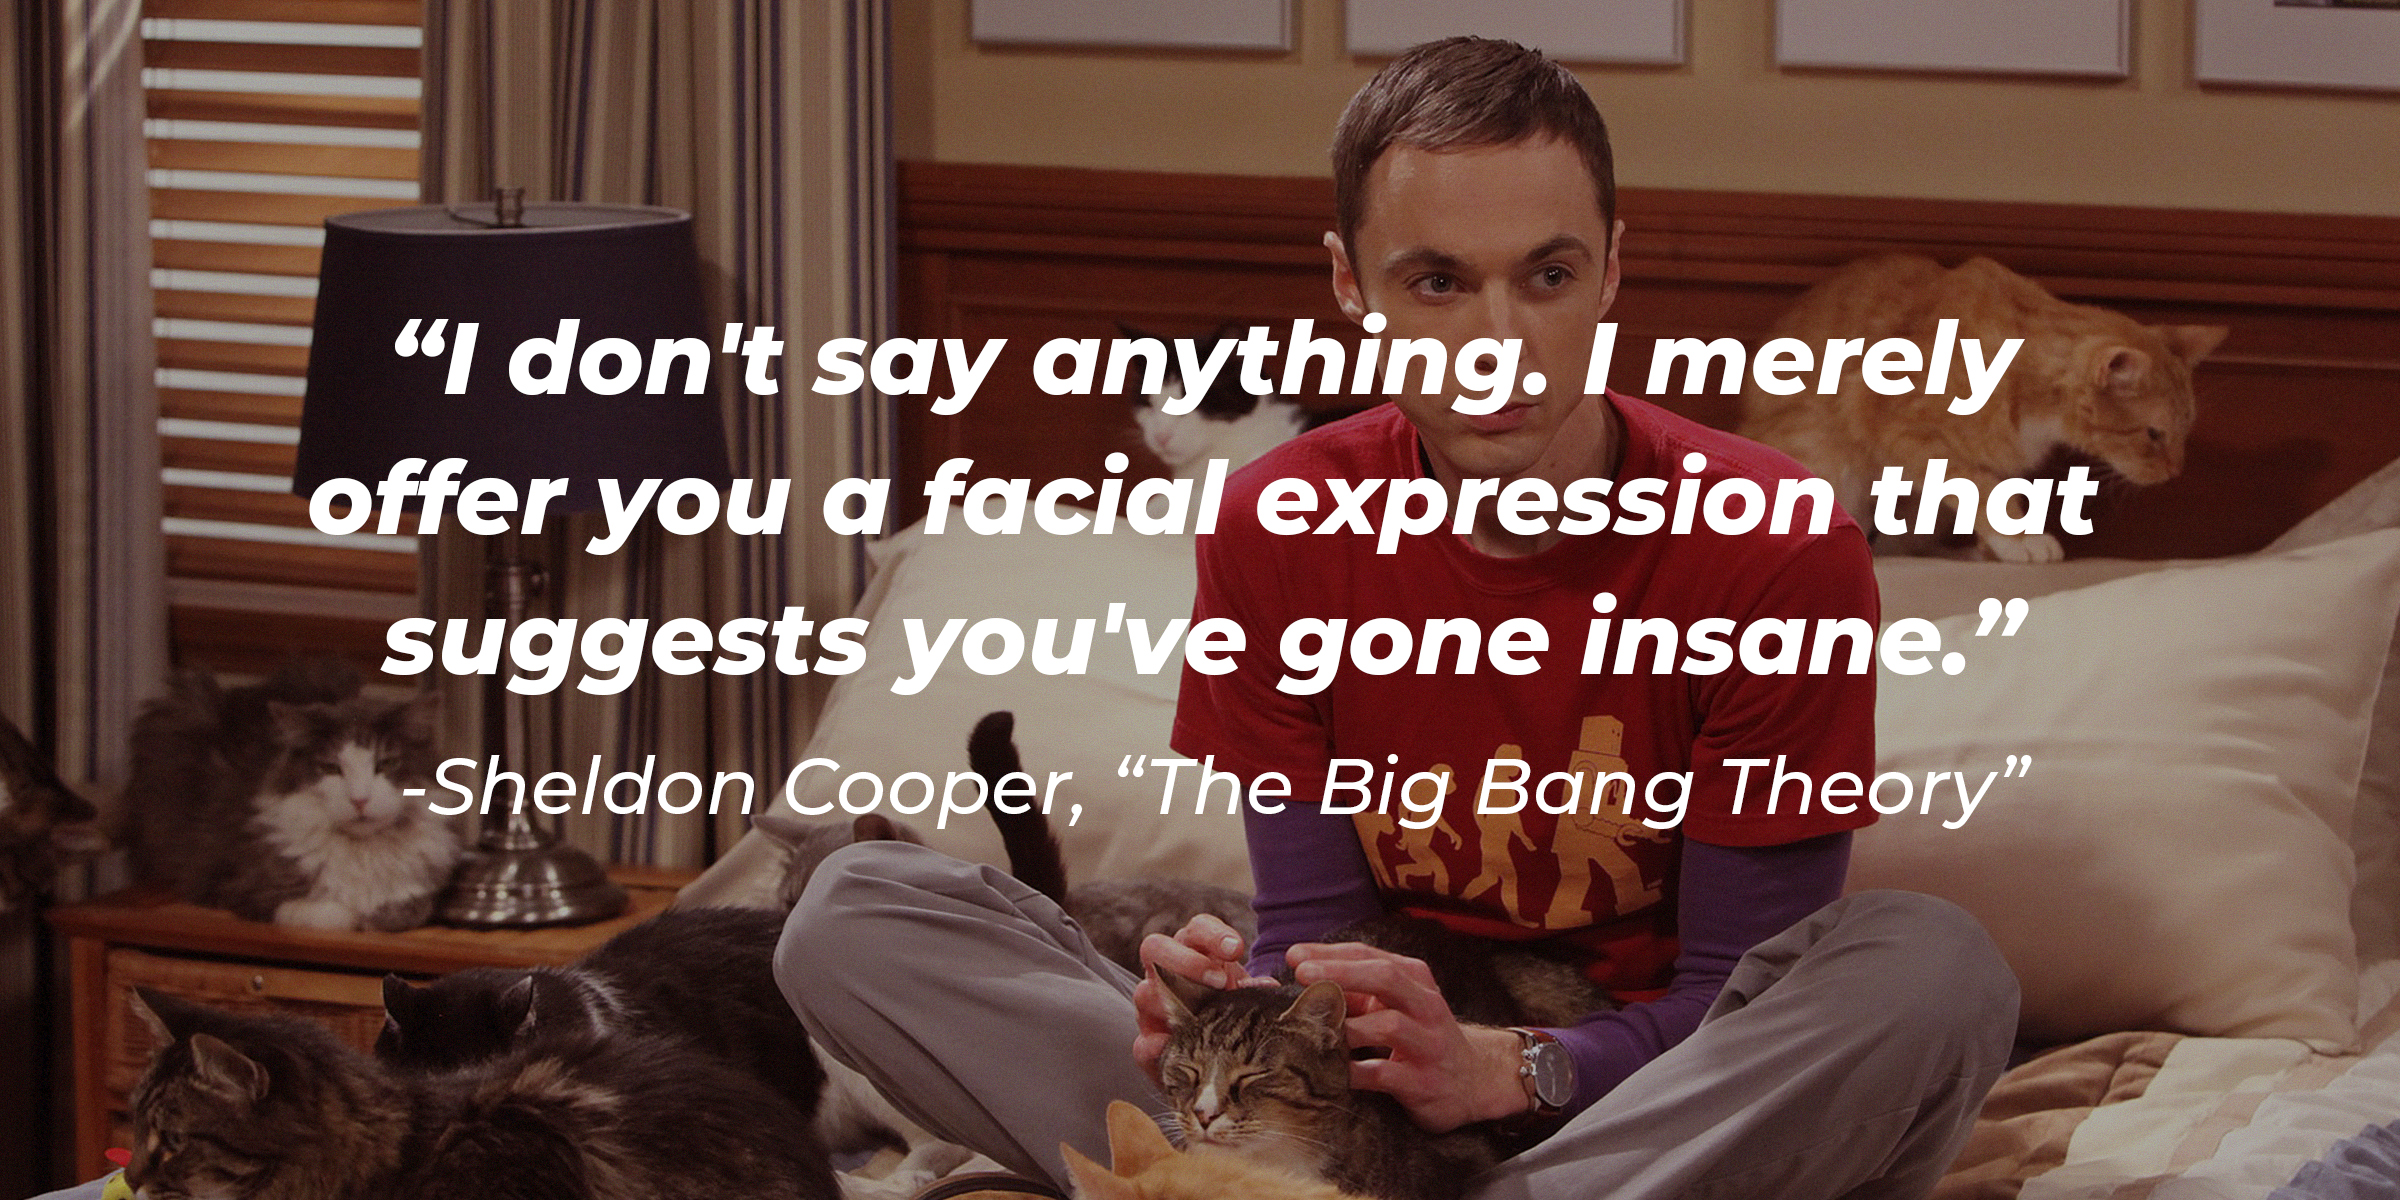 Sheldon Cooper's quote from "The Big Bang Theory": "I don't say anything. I merely offer you a facial expression that suggests you've gone insane." | Source: facebook.com/TheBigBangTheory